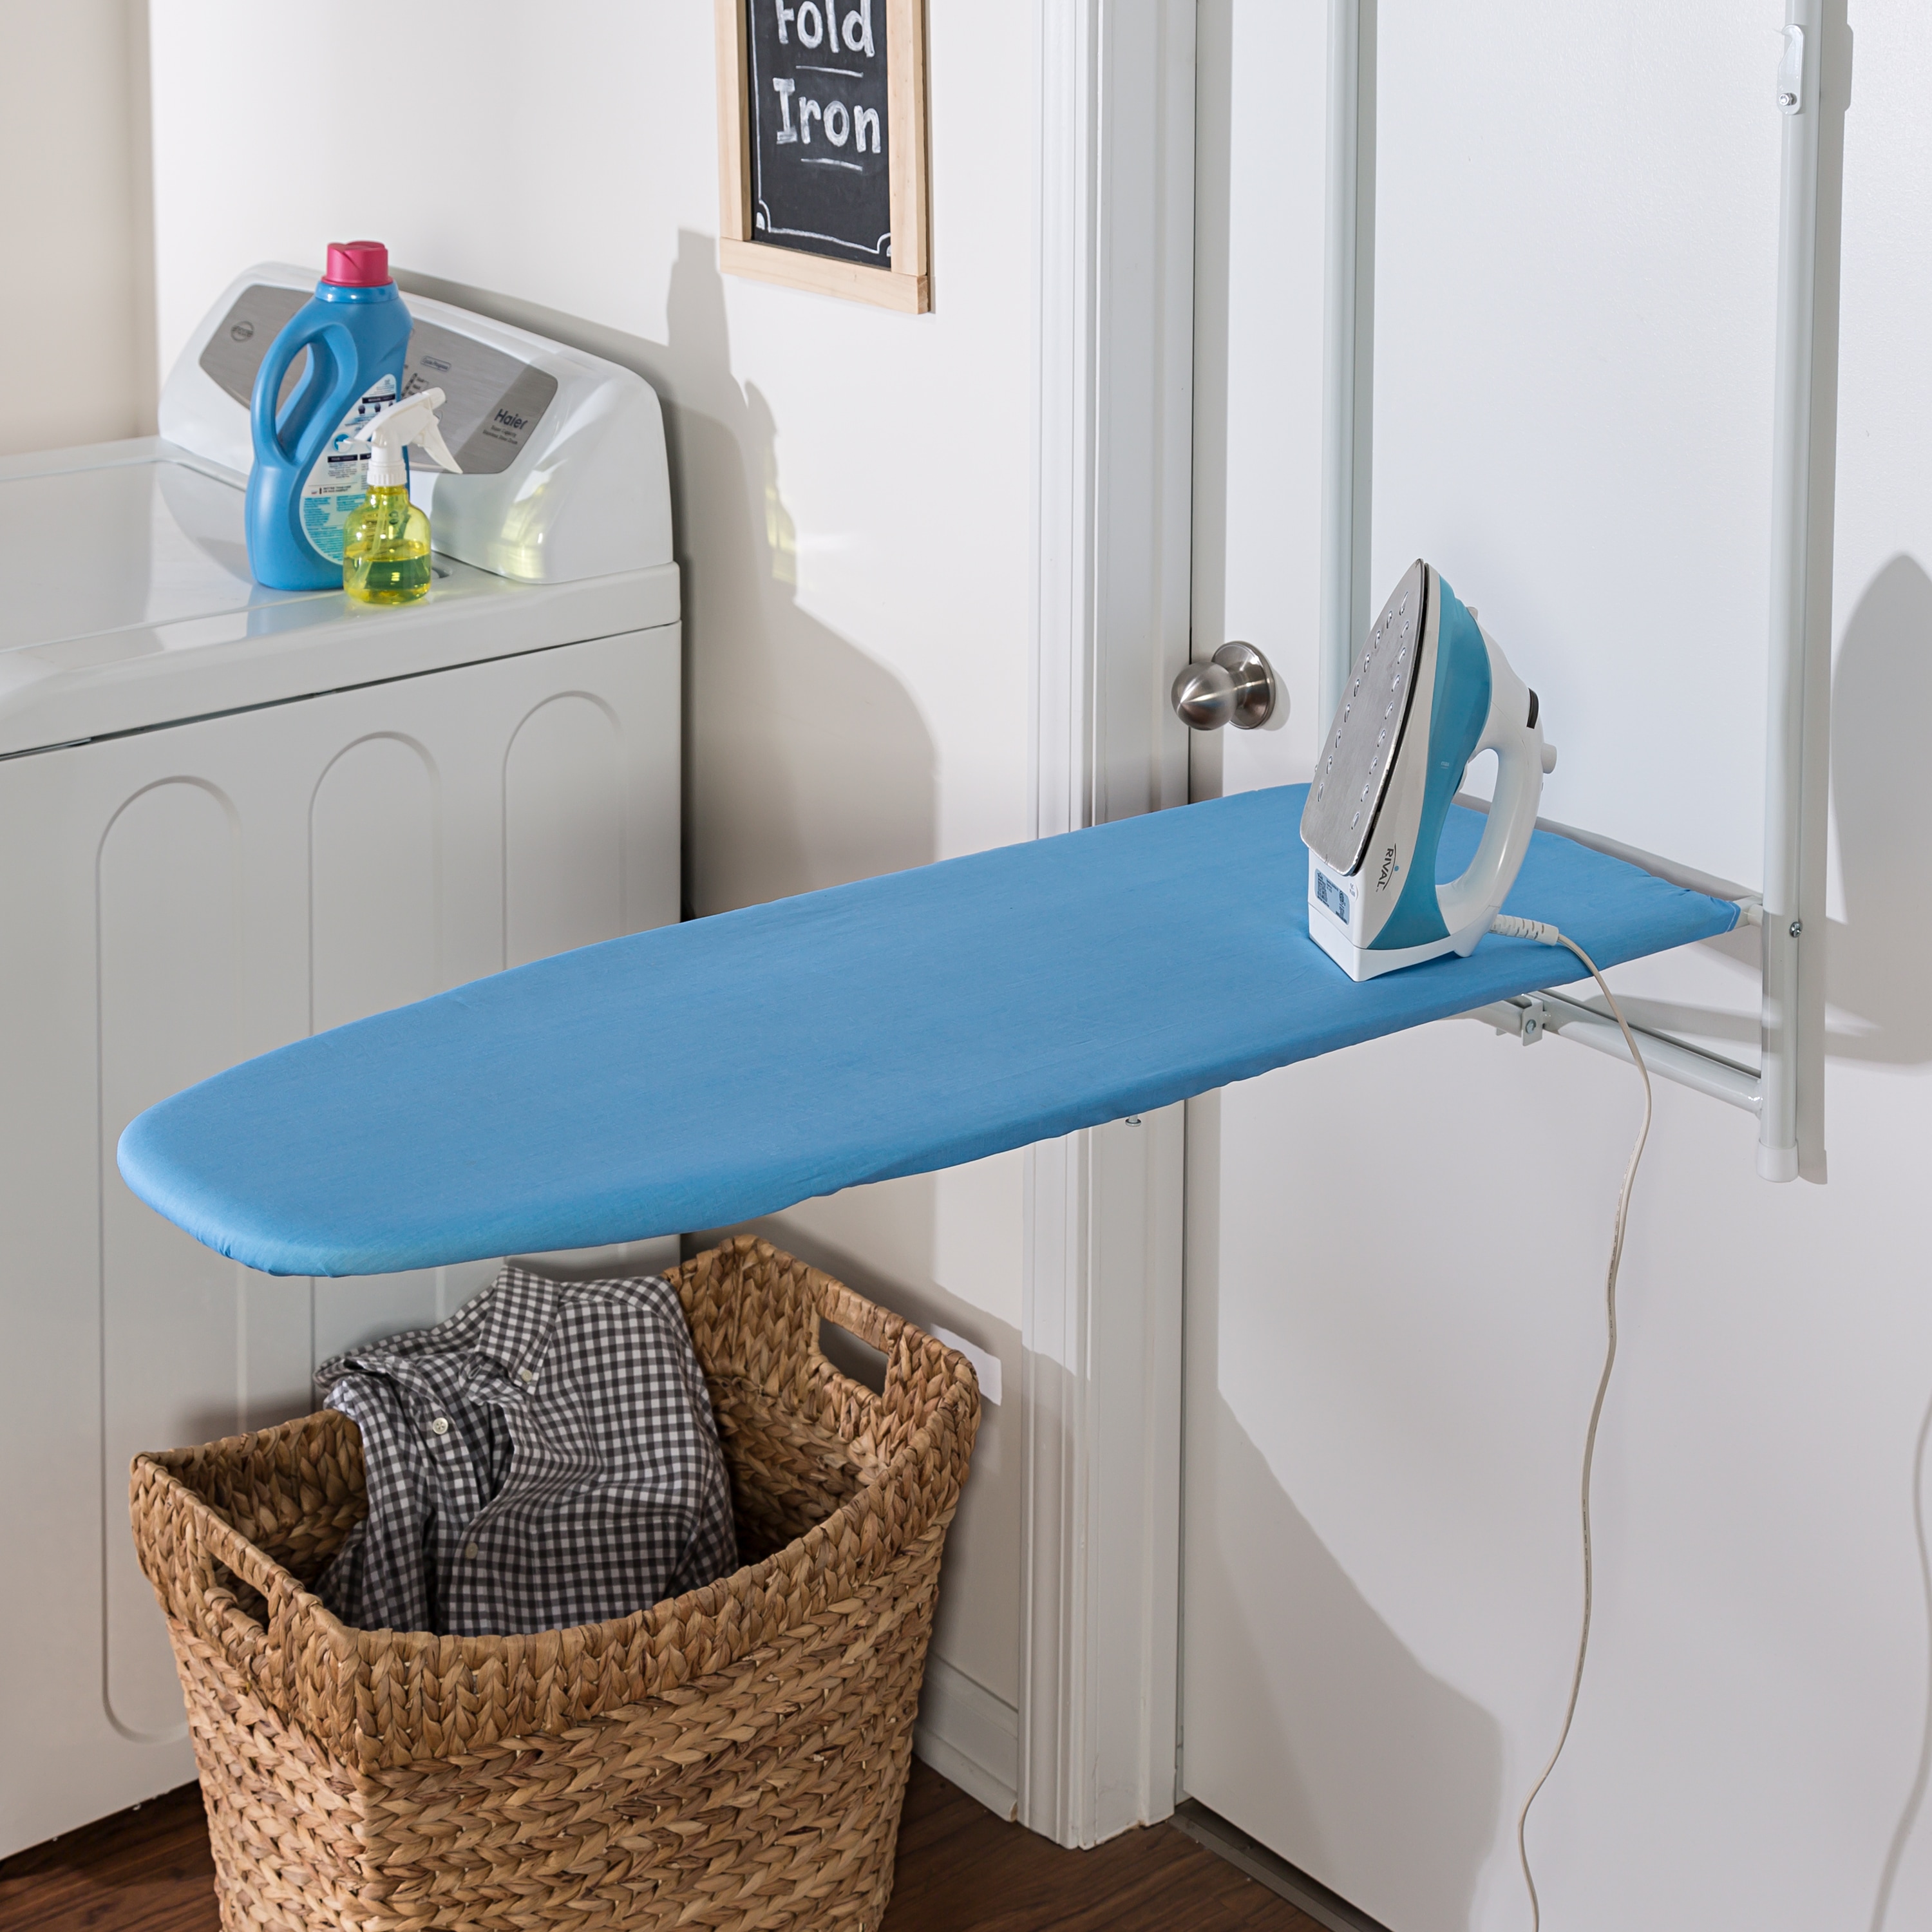 Foldable Ironing Board, Travel Ironing Board with Heat Resistant Ironing Board Cover, Easily Folds for Convenient Storage.